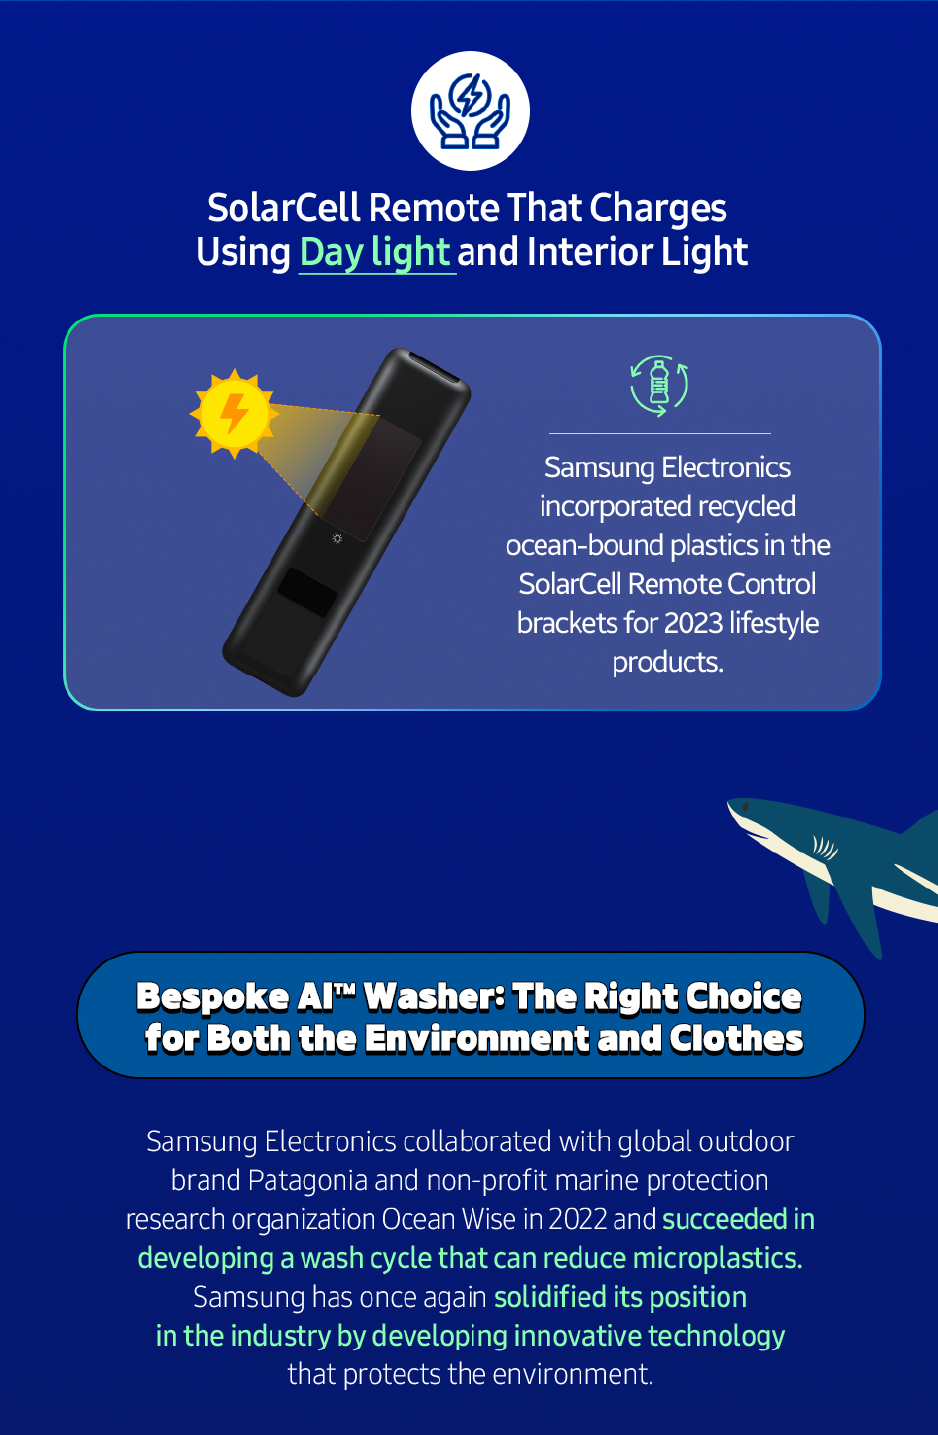 samsung-solar-cell-remote-bespoke-ai-washer-world-water-day-2023